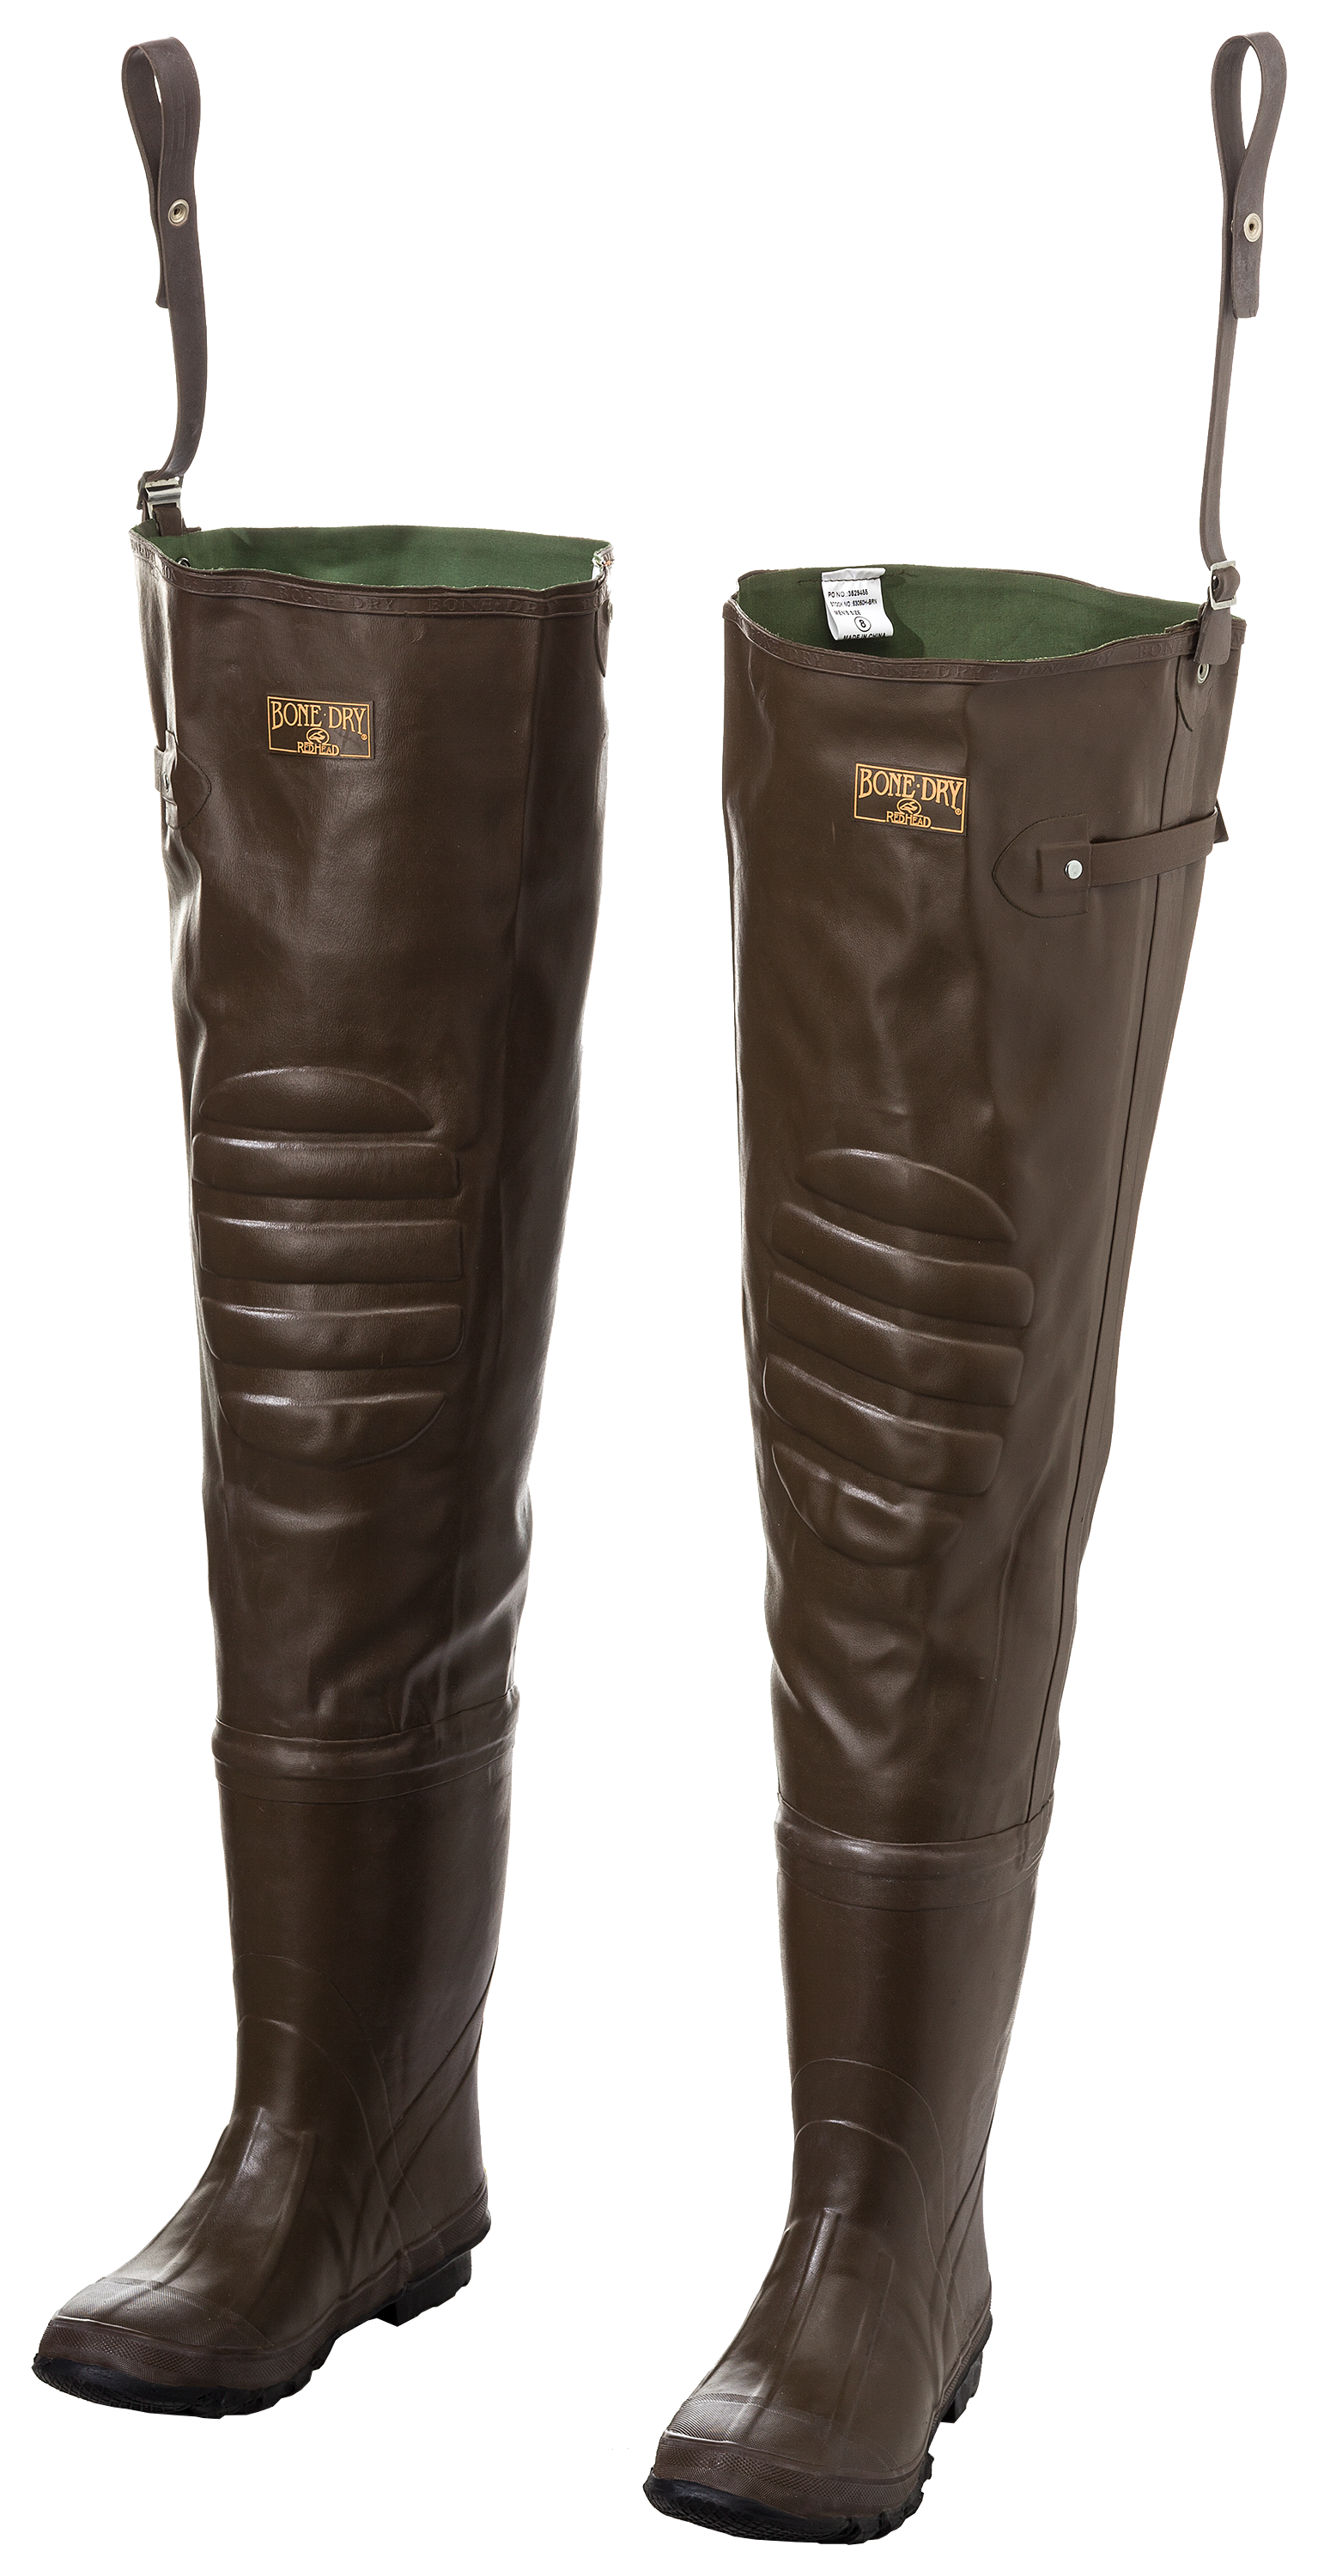 RedHead Bone-Dry Rubber Boot-Foot Hip Waders for Men, Ladies and Youth